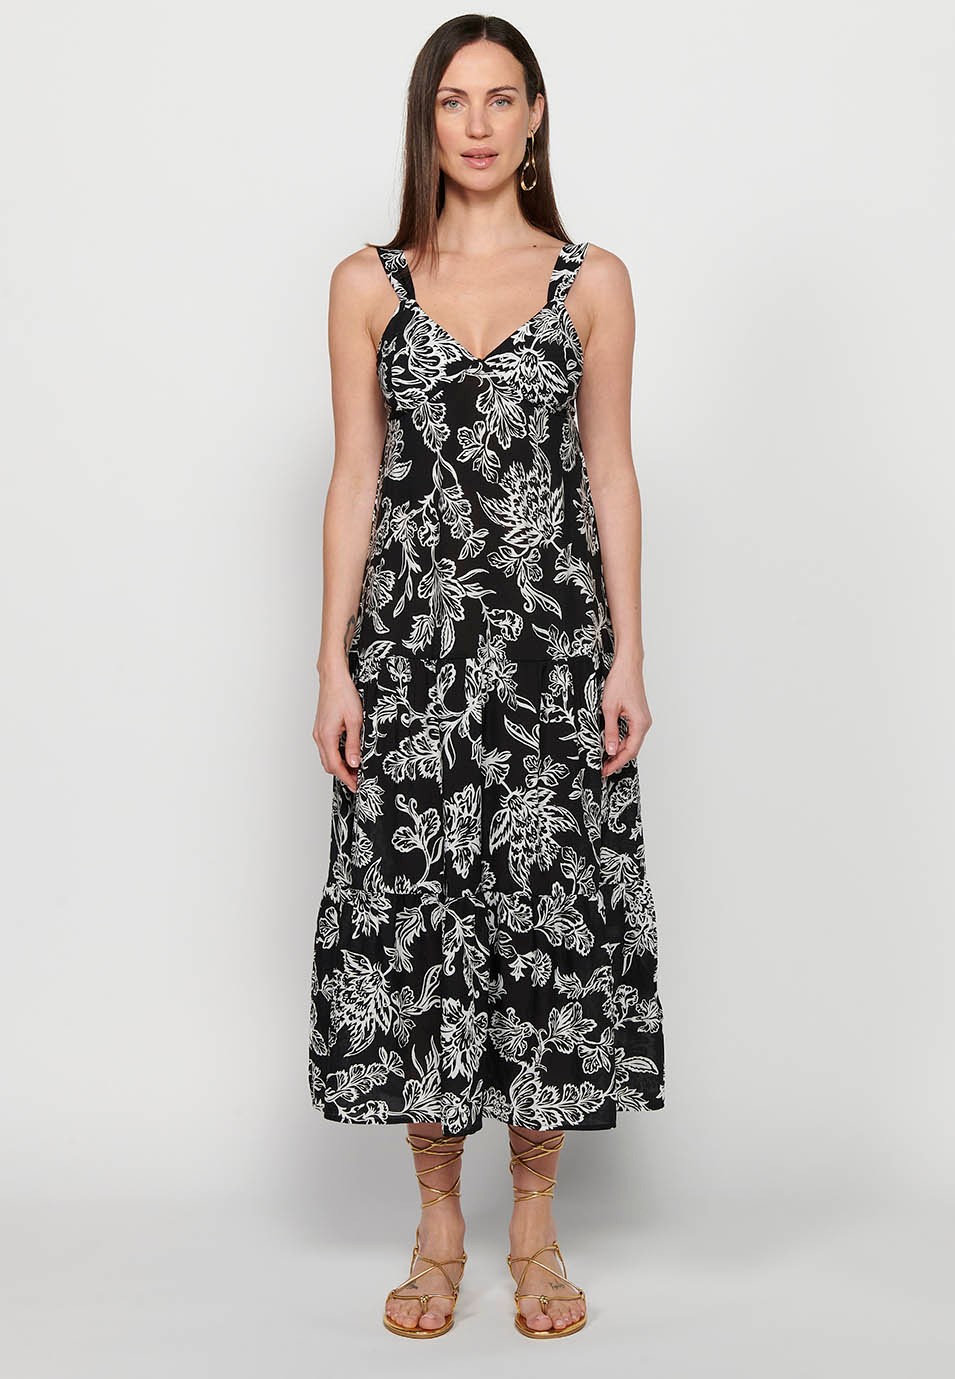 Long dress with wide straps with ruffle finish and V-neckline with floral print in Black for Women 8